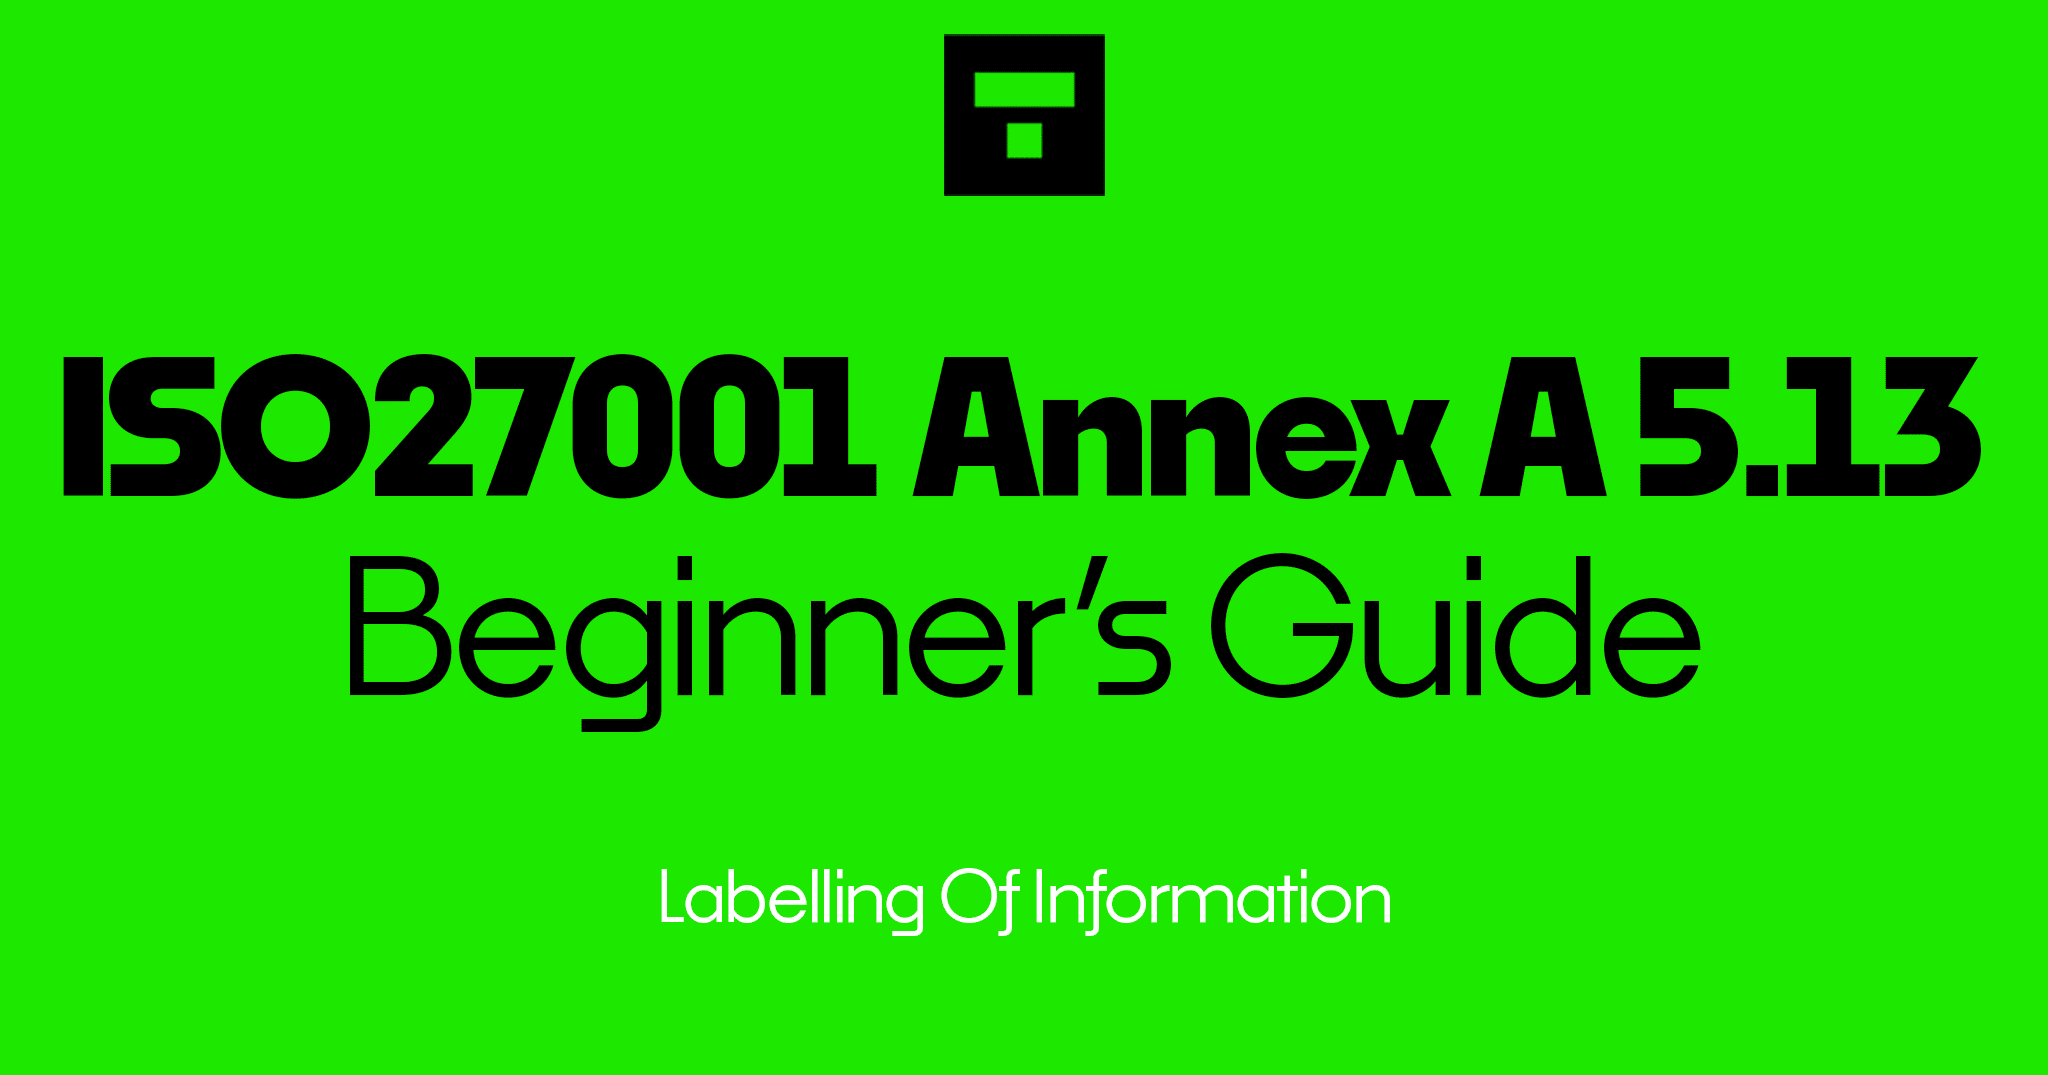 ISO 27001 Annex A 5.13 Labelling Of Information Beginner’s Guide